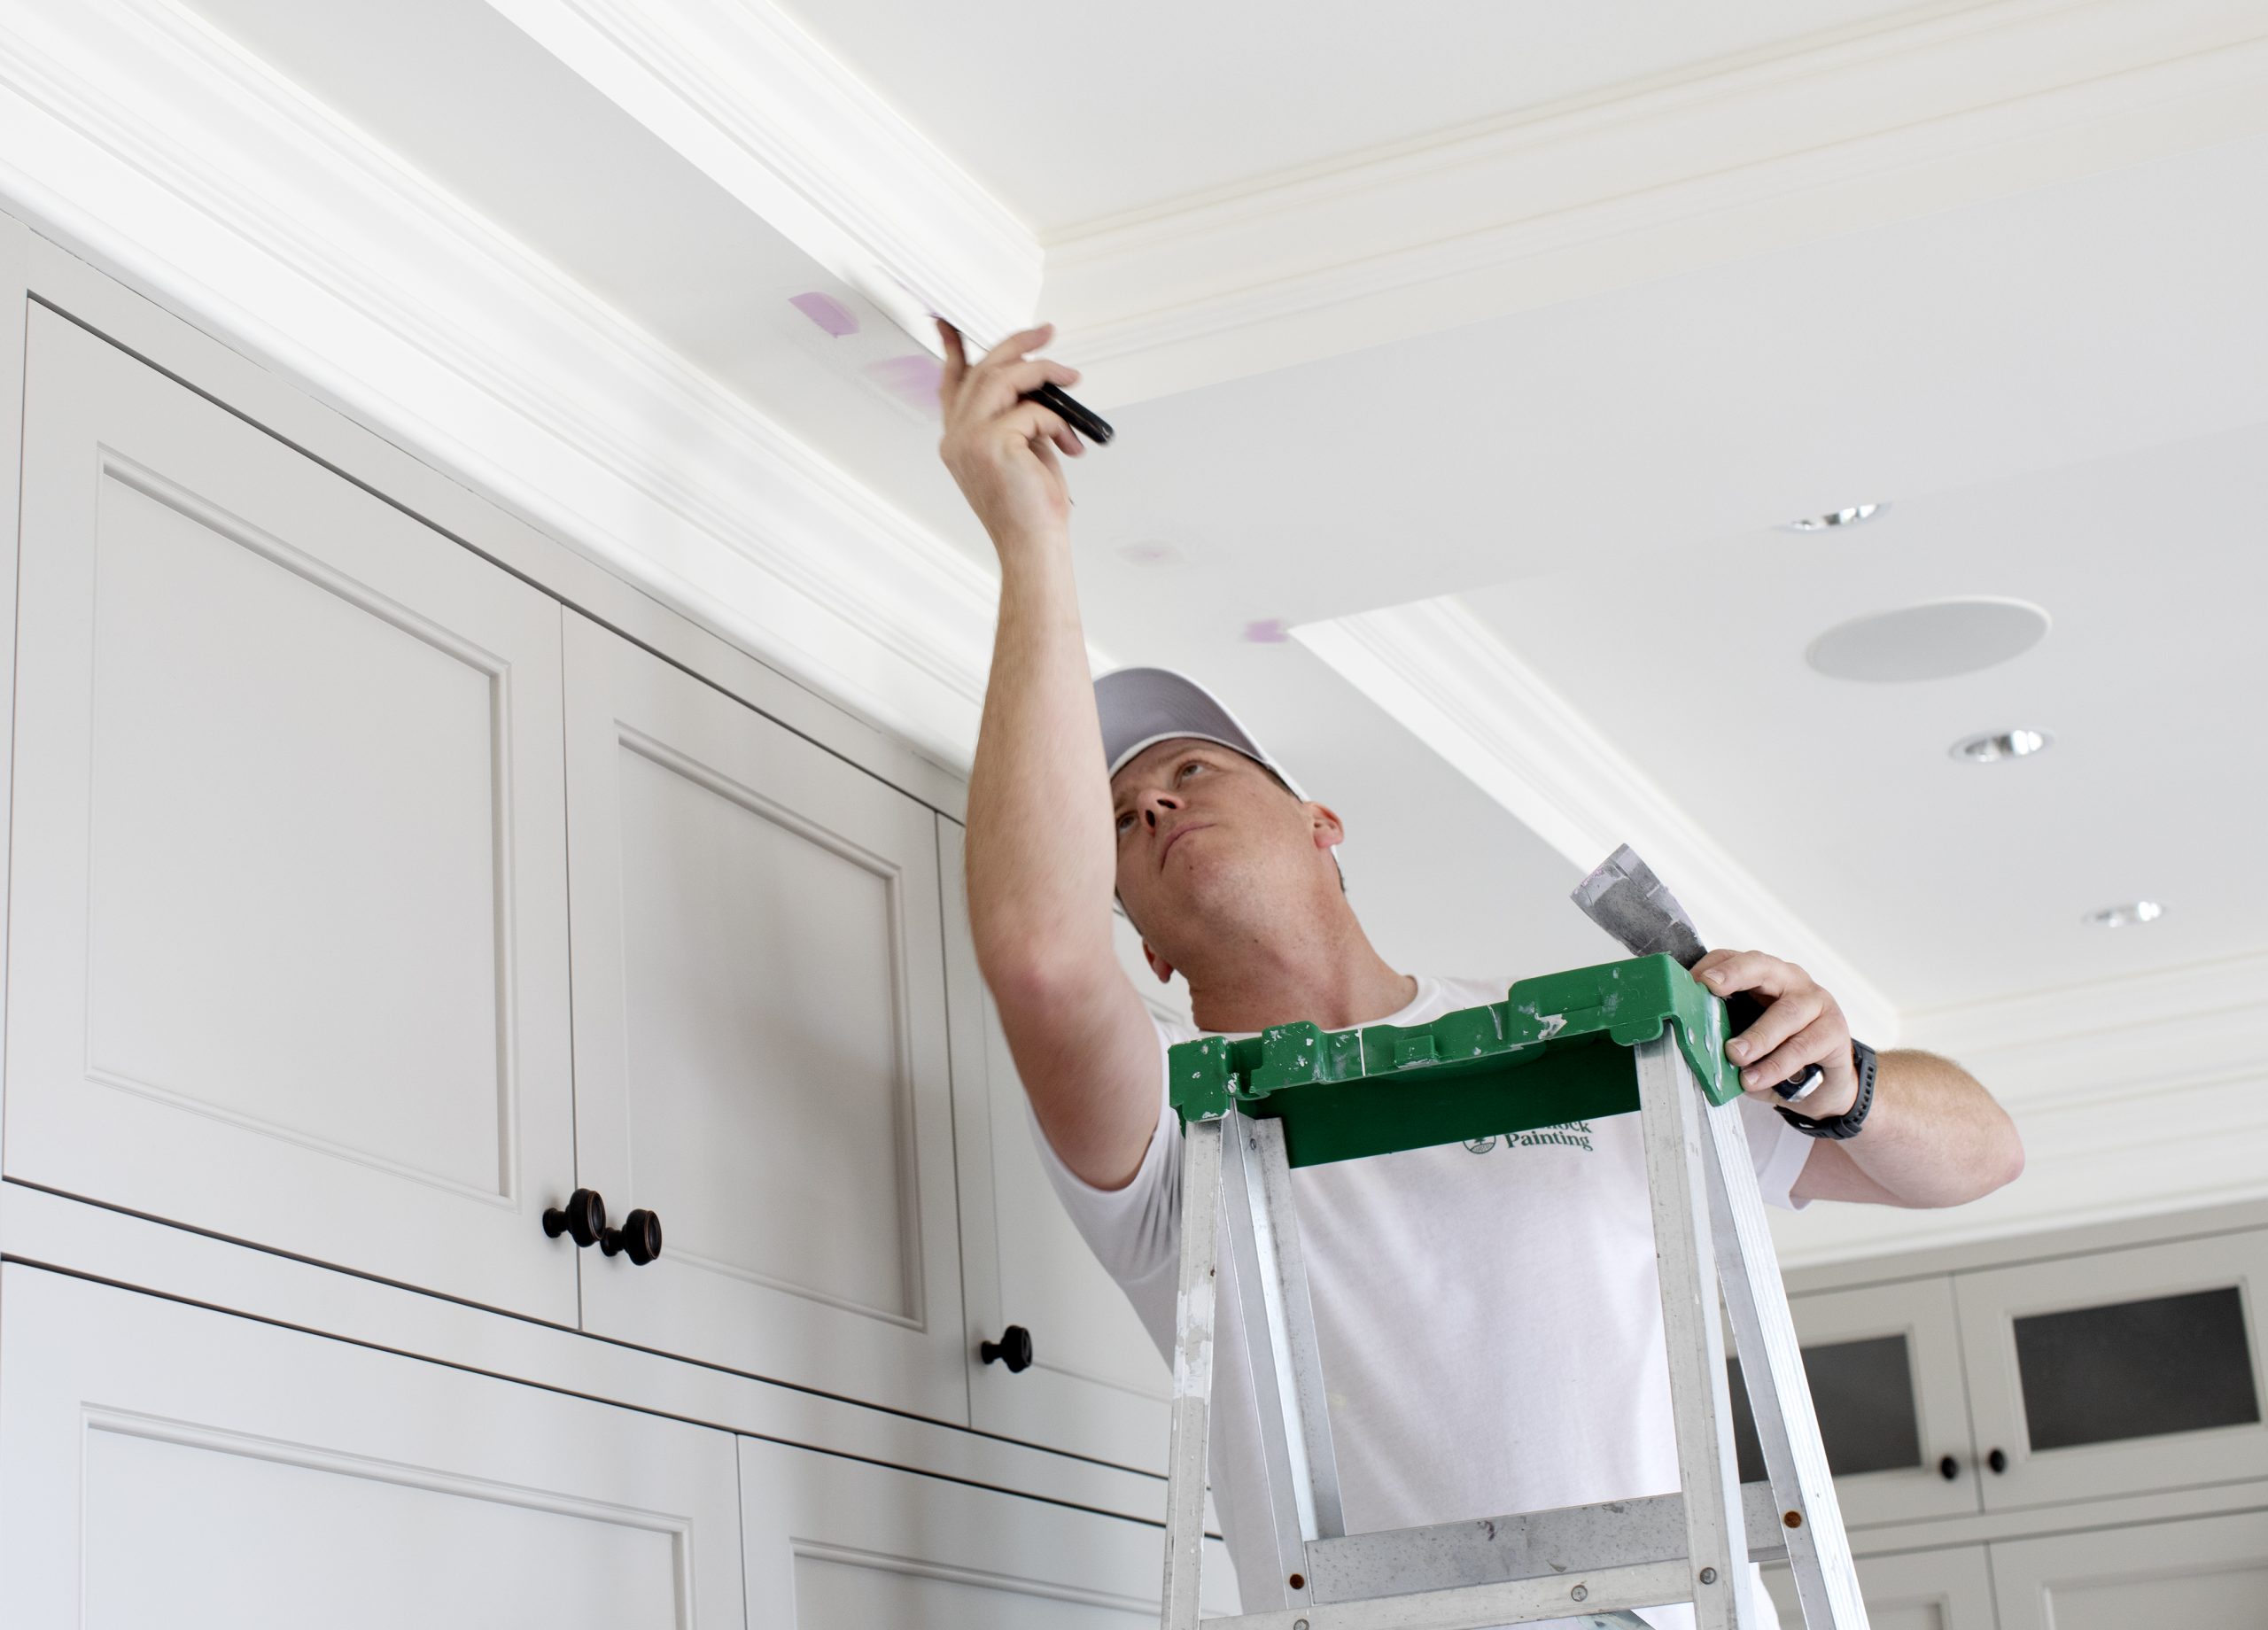 A man dressed in all white stands on a ladder while applying putty to a ceiling